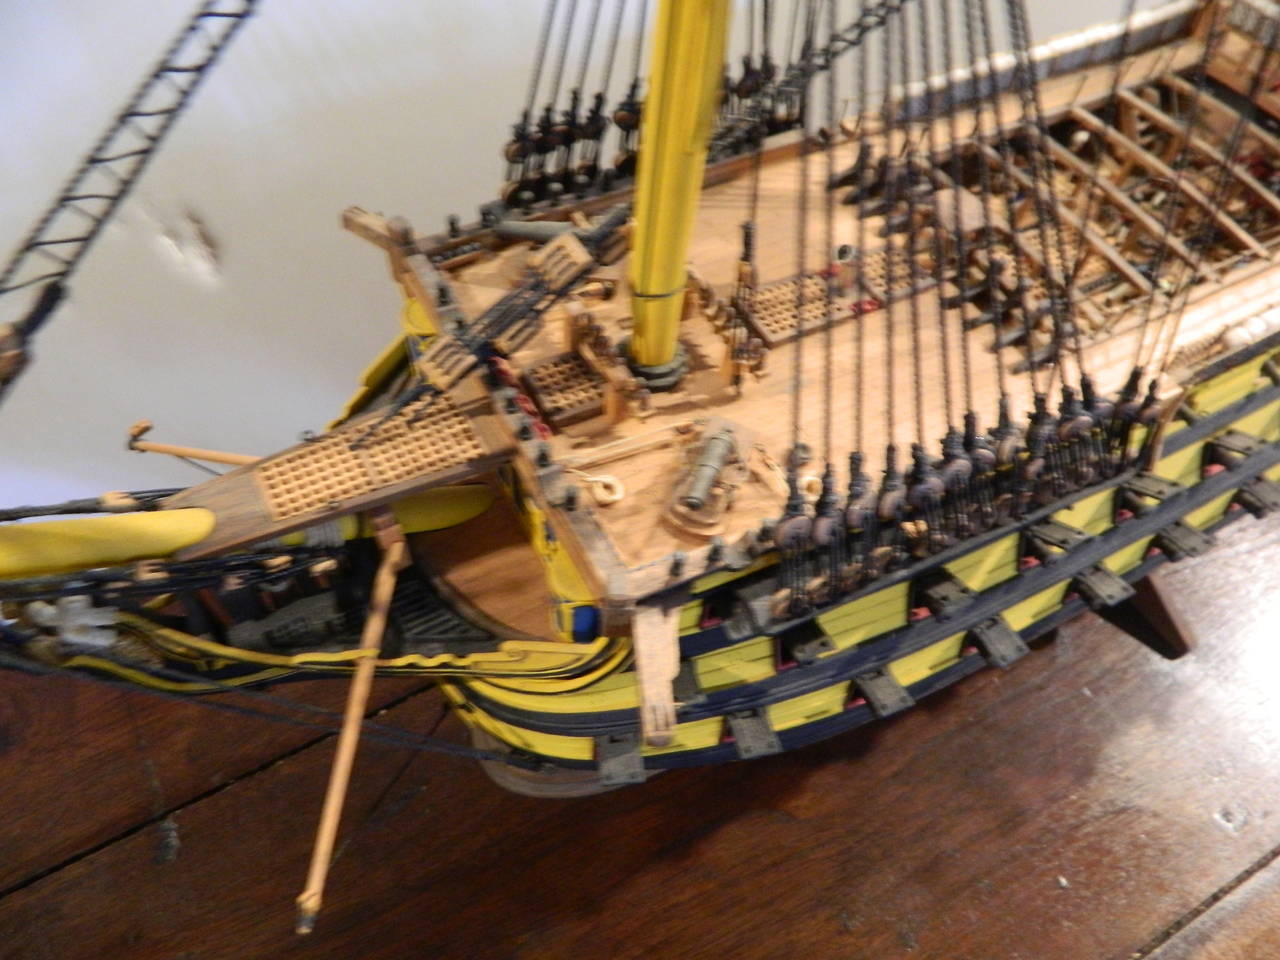 Ship Model of the HMS Victory, 1758, England 2